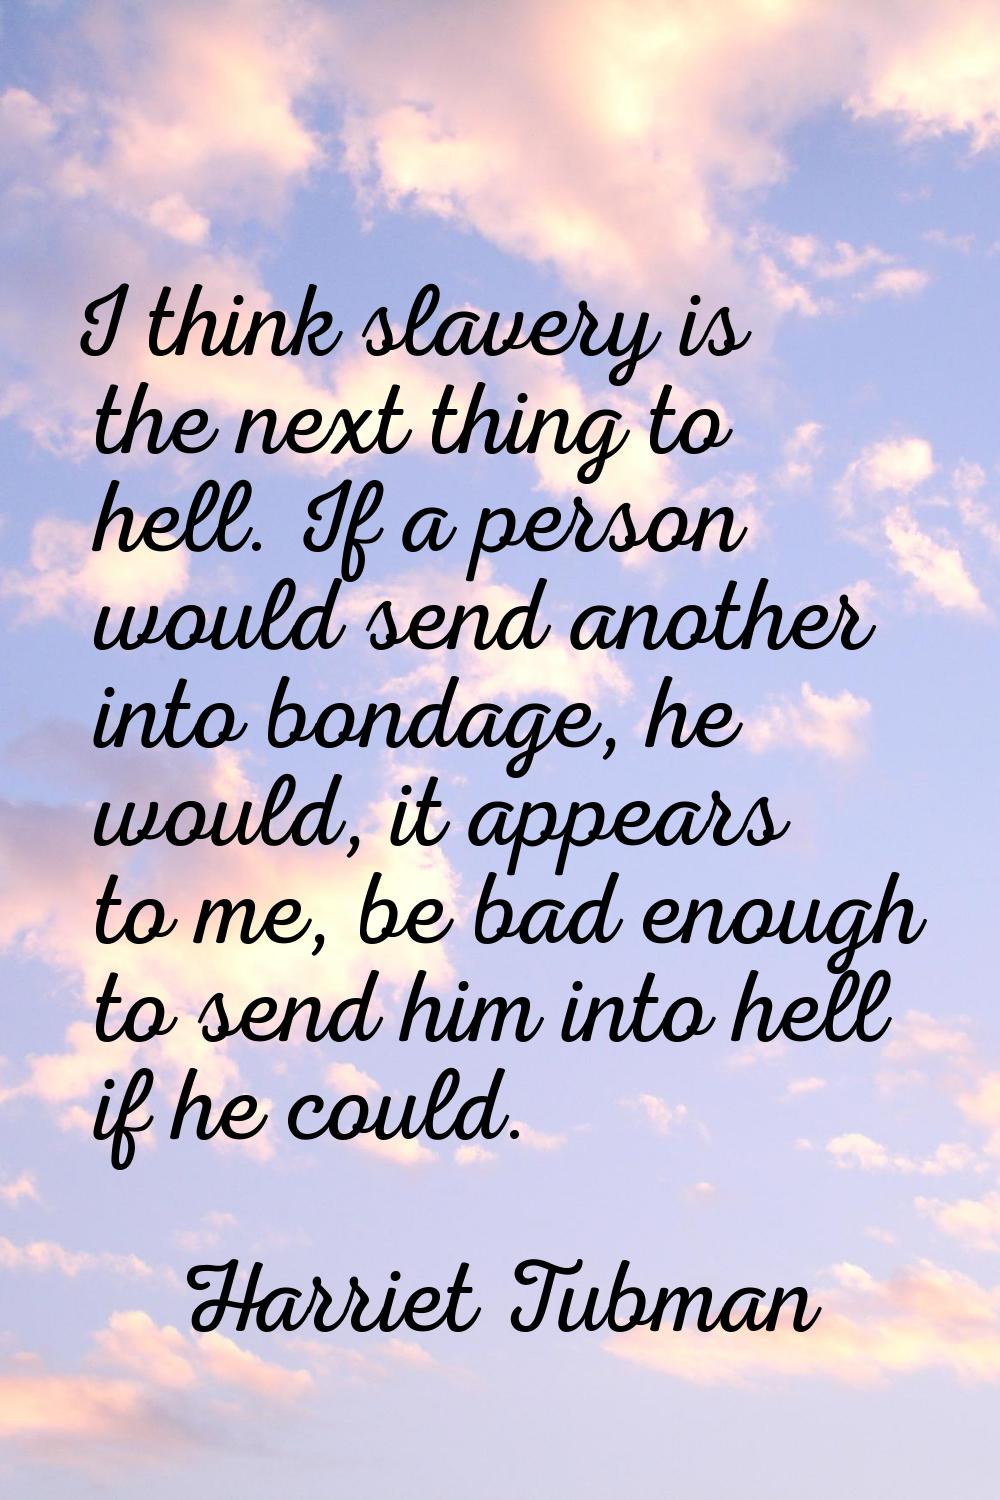 I think slavery is the next thing to hell. If a person would send another into bondage, he would, i